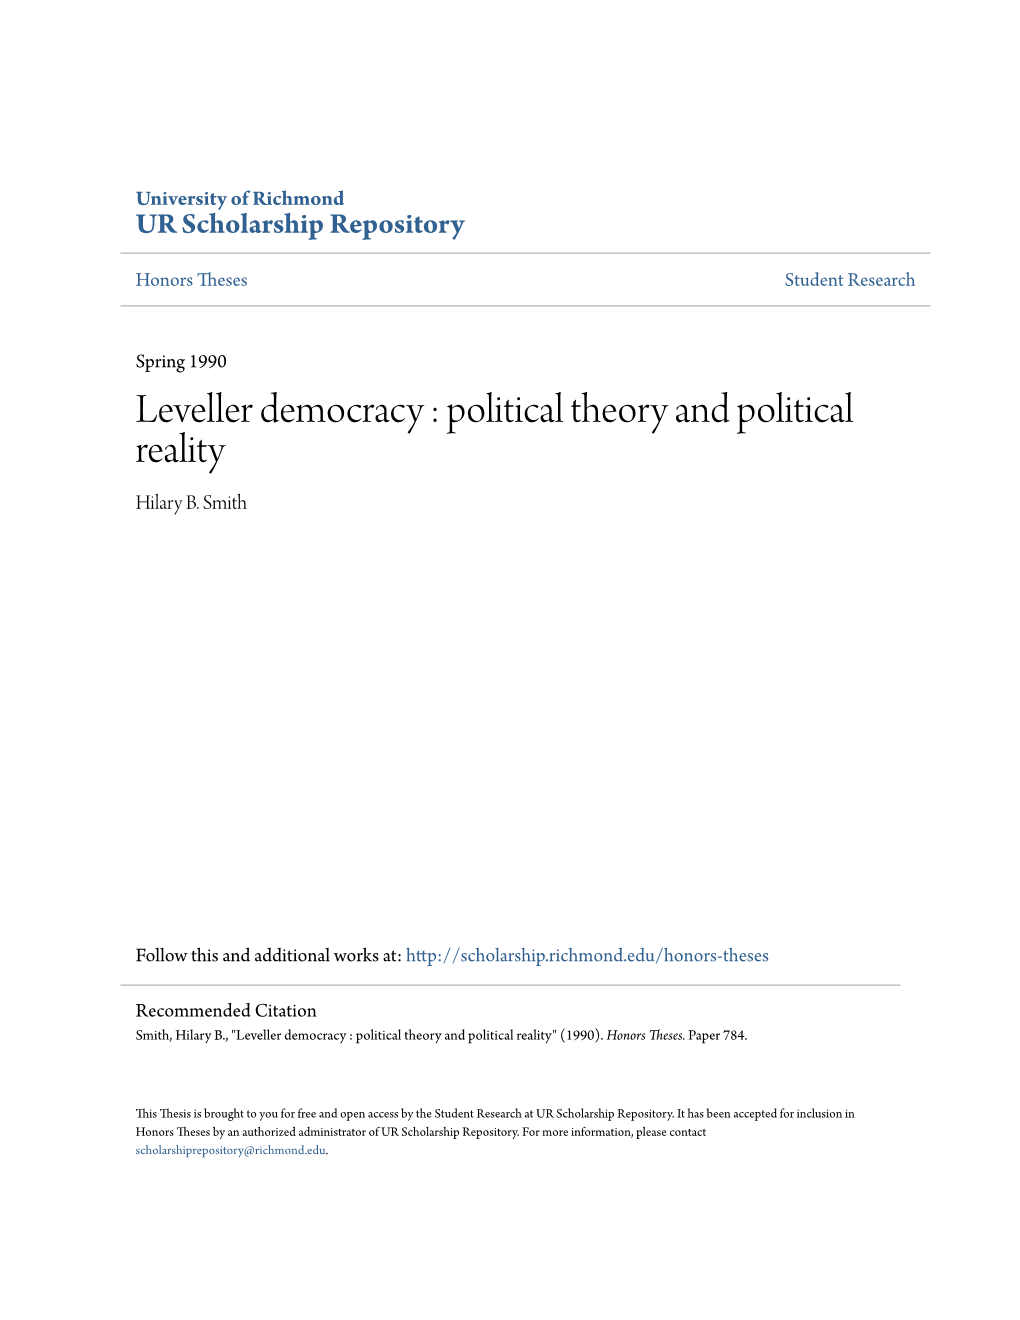 Leveller Democracy : Political Theory and Political Reality Hilary B